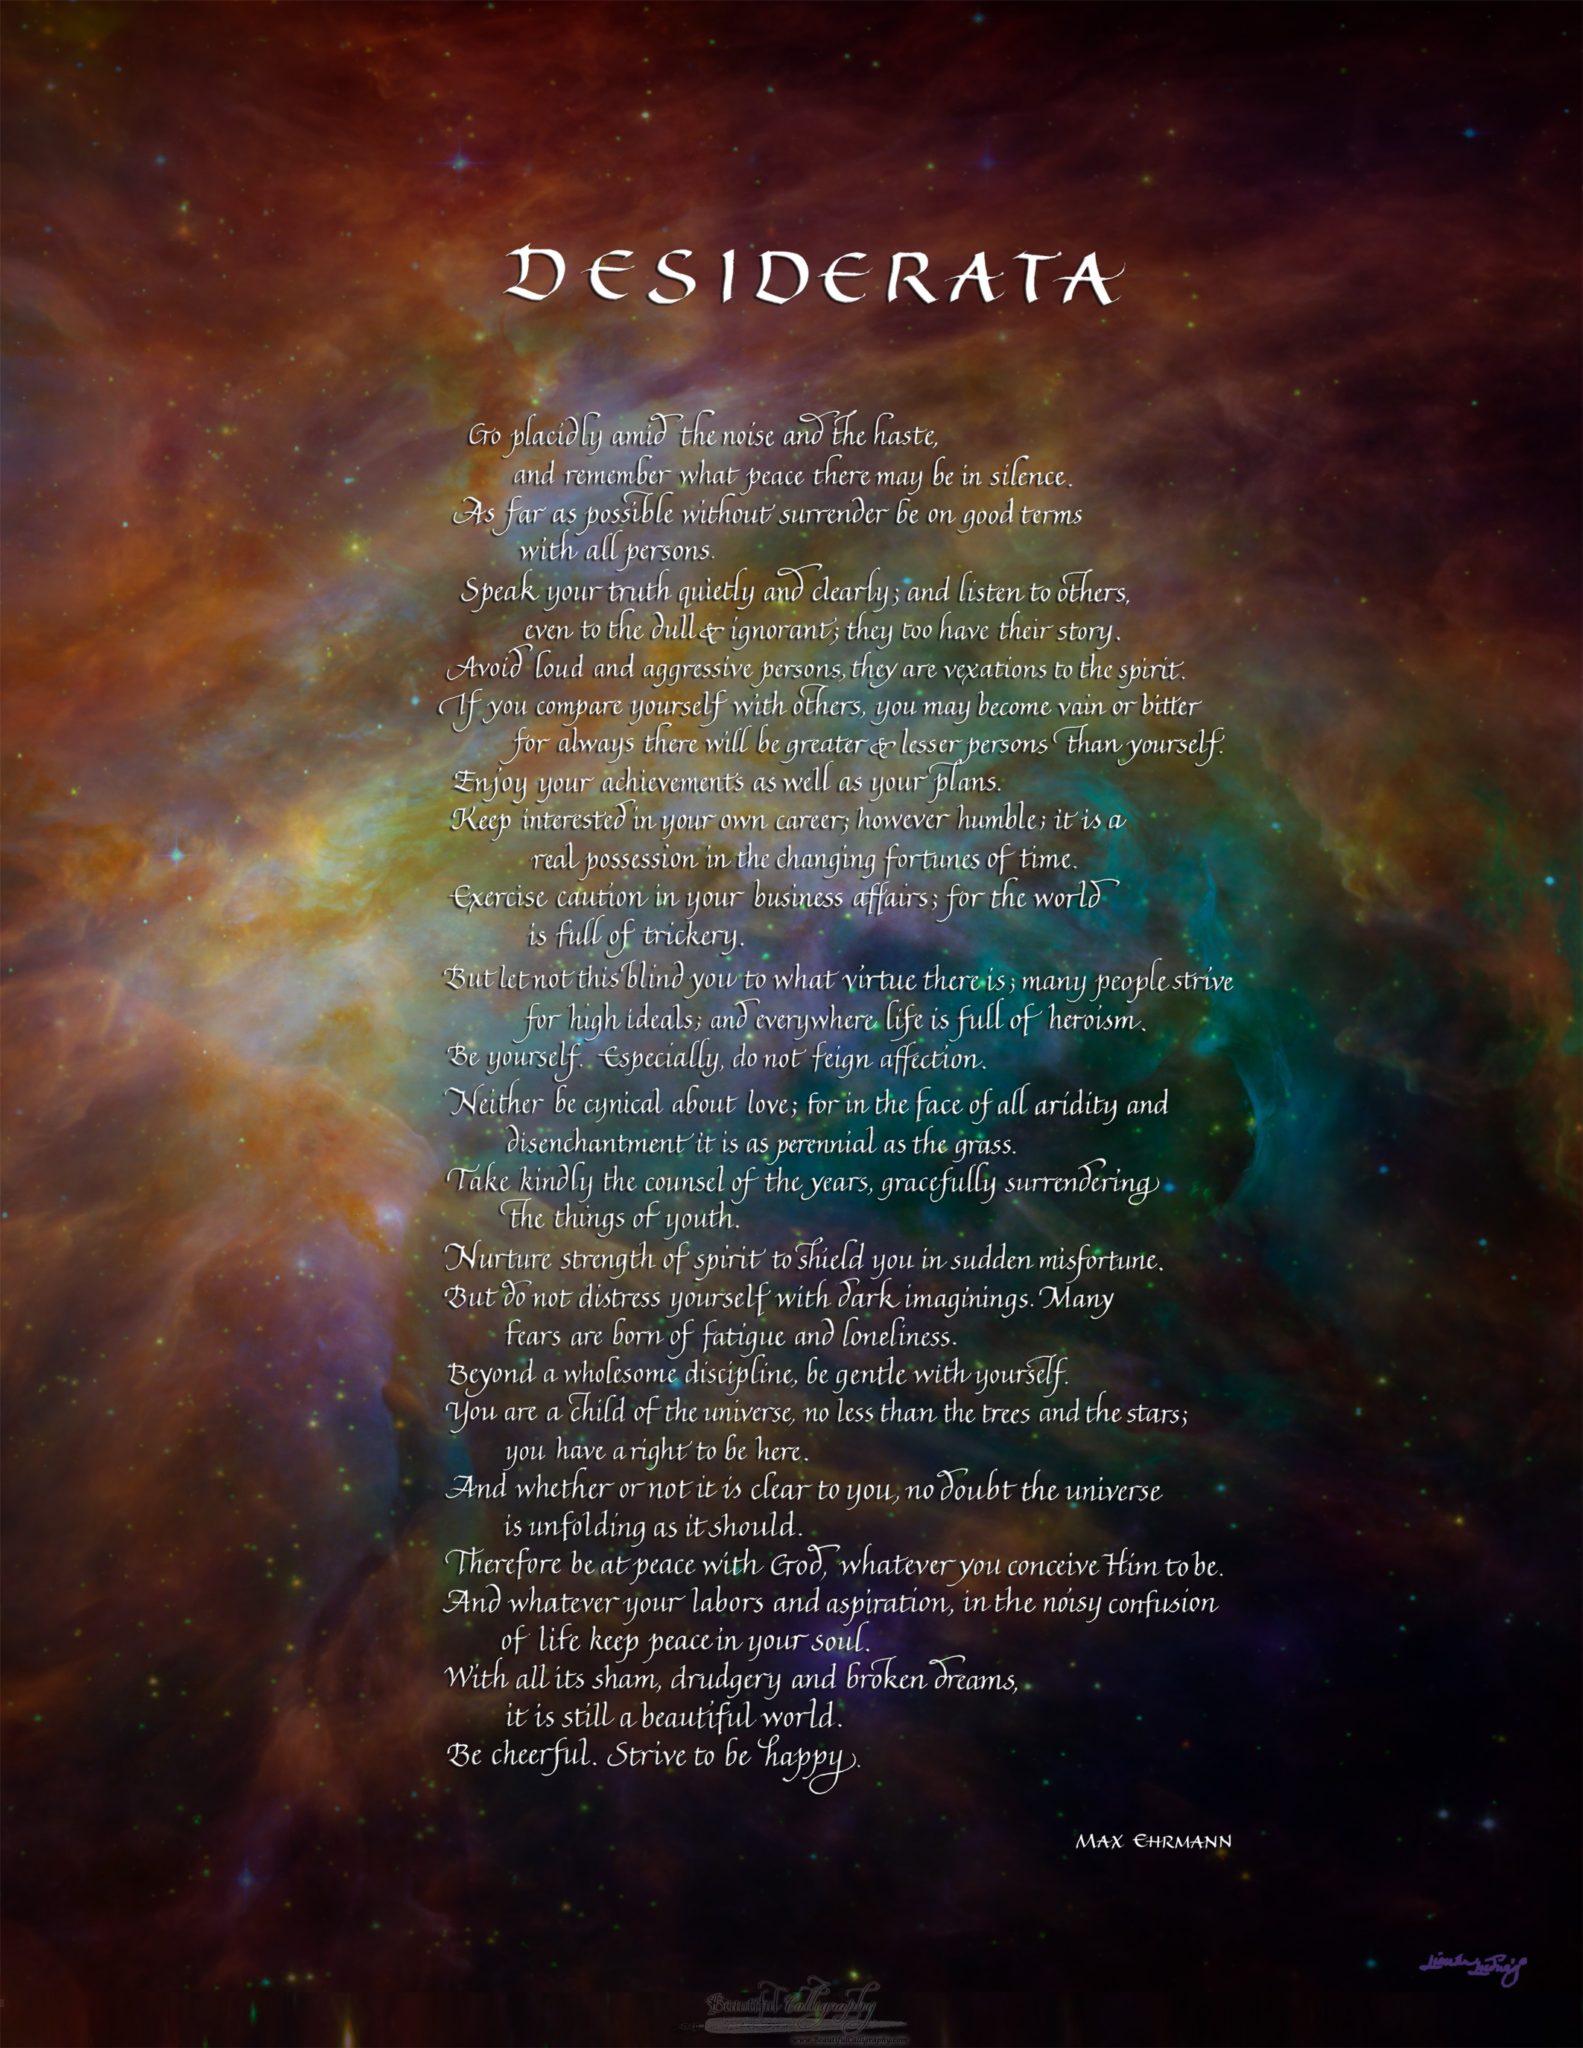 desiderata written in calligraphy and superiposed on a photo from NASA